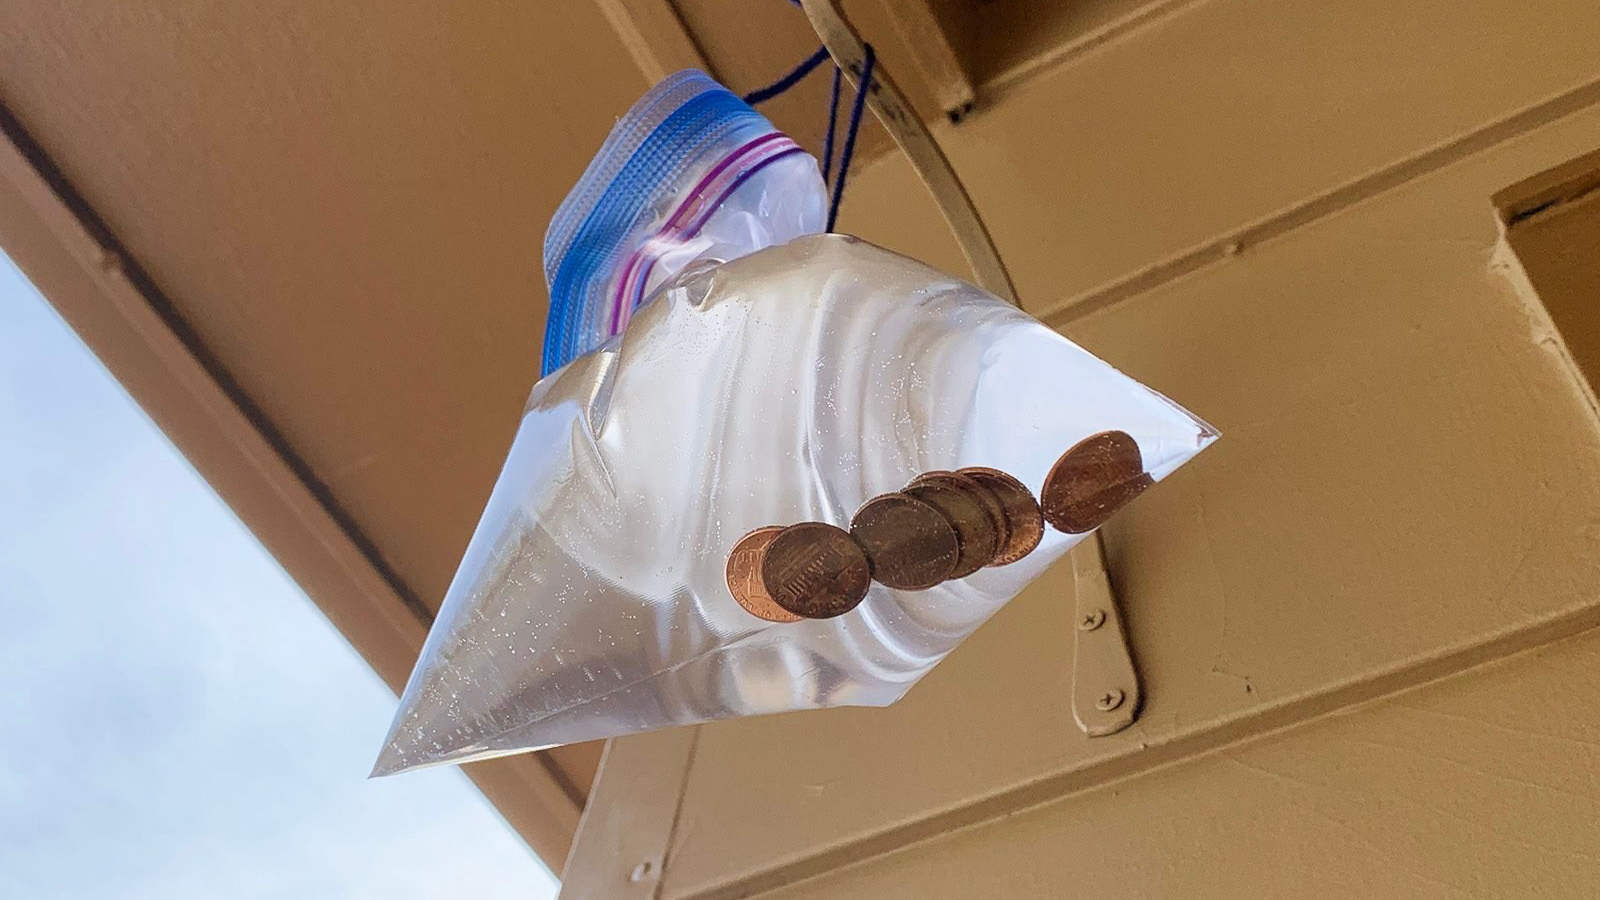 Lifehack: Hang Pennies in a Bag of Water, Here's Why